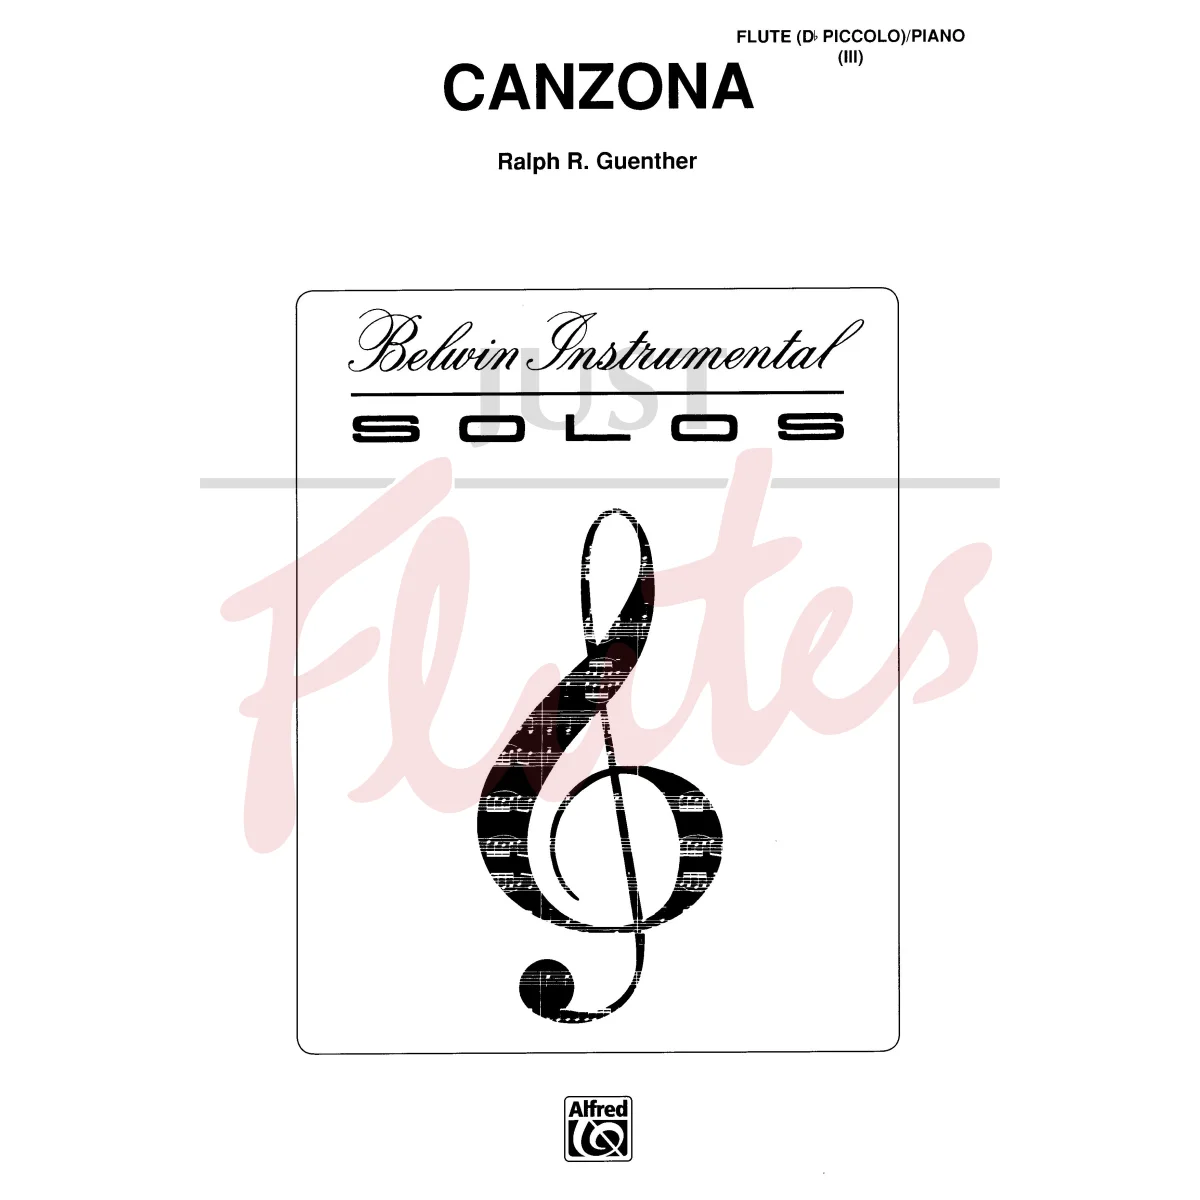 Canzona for Flute and Piano